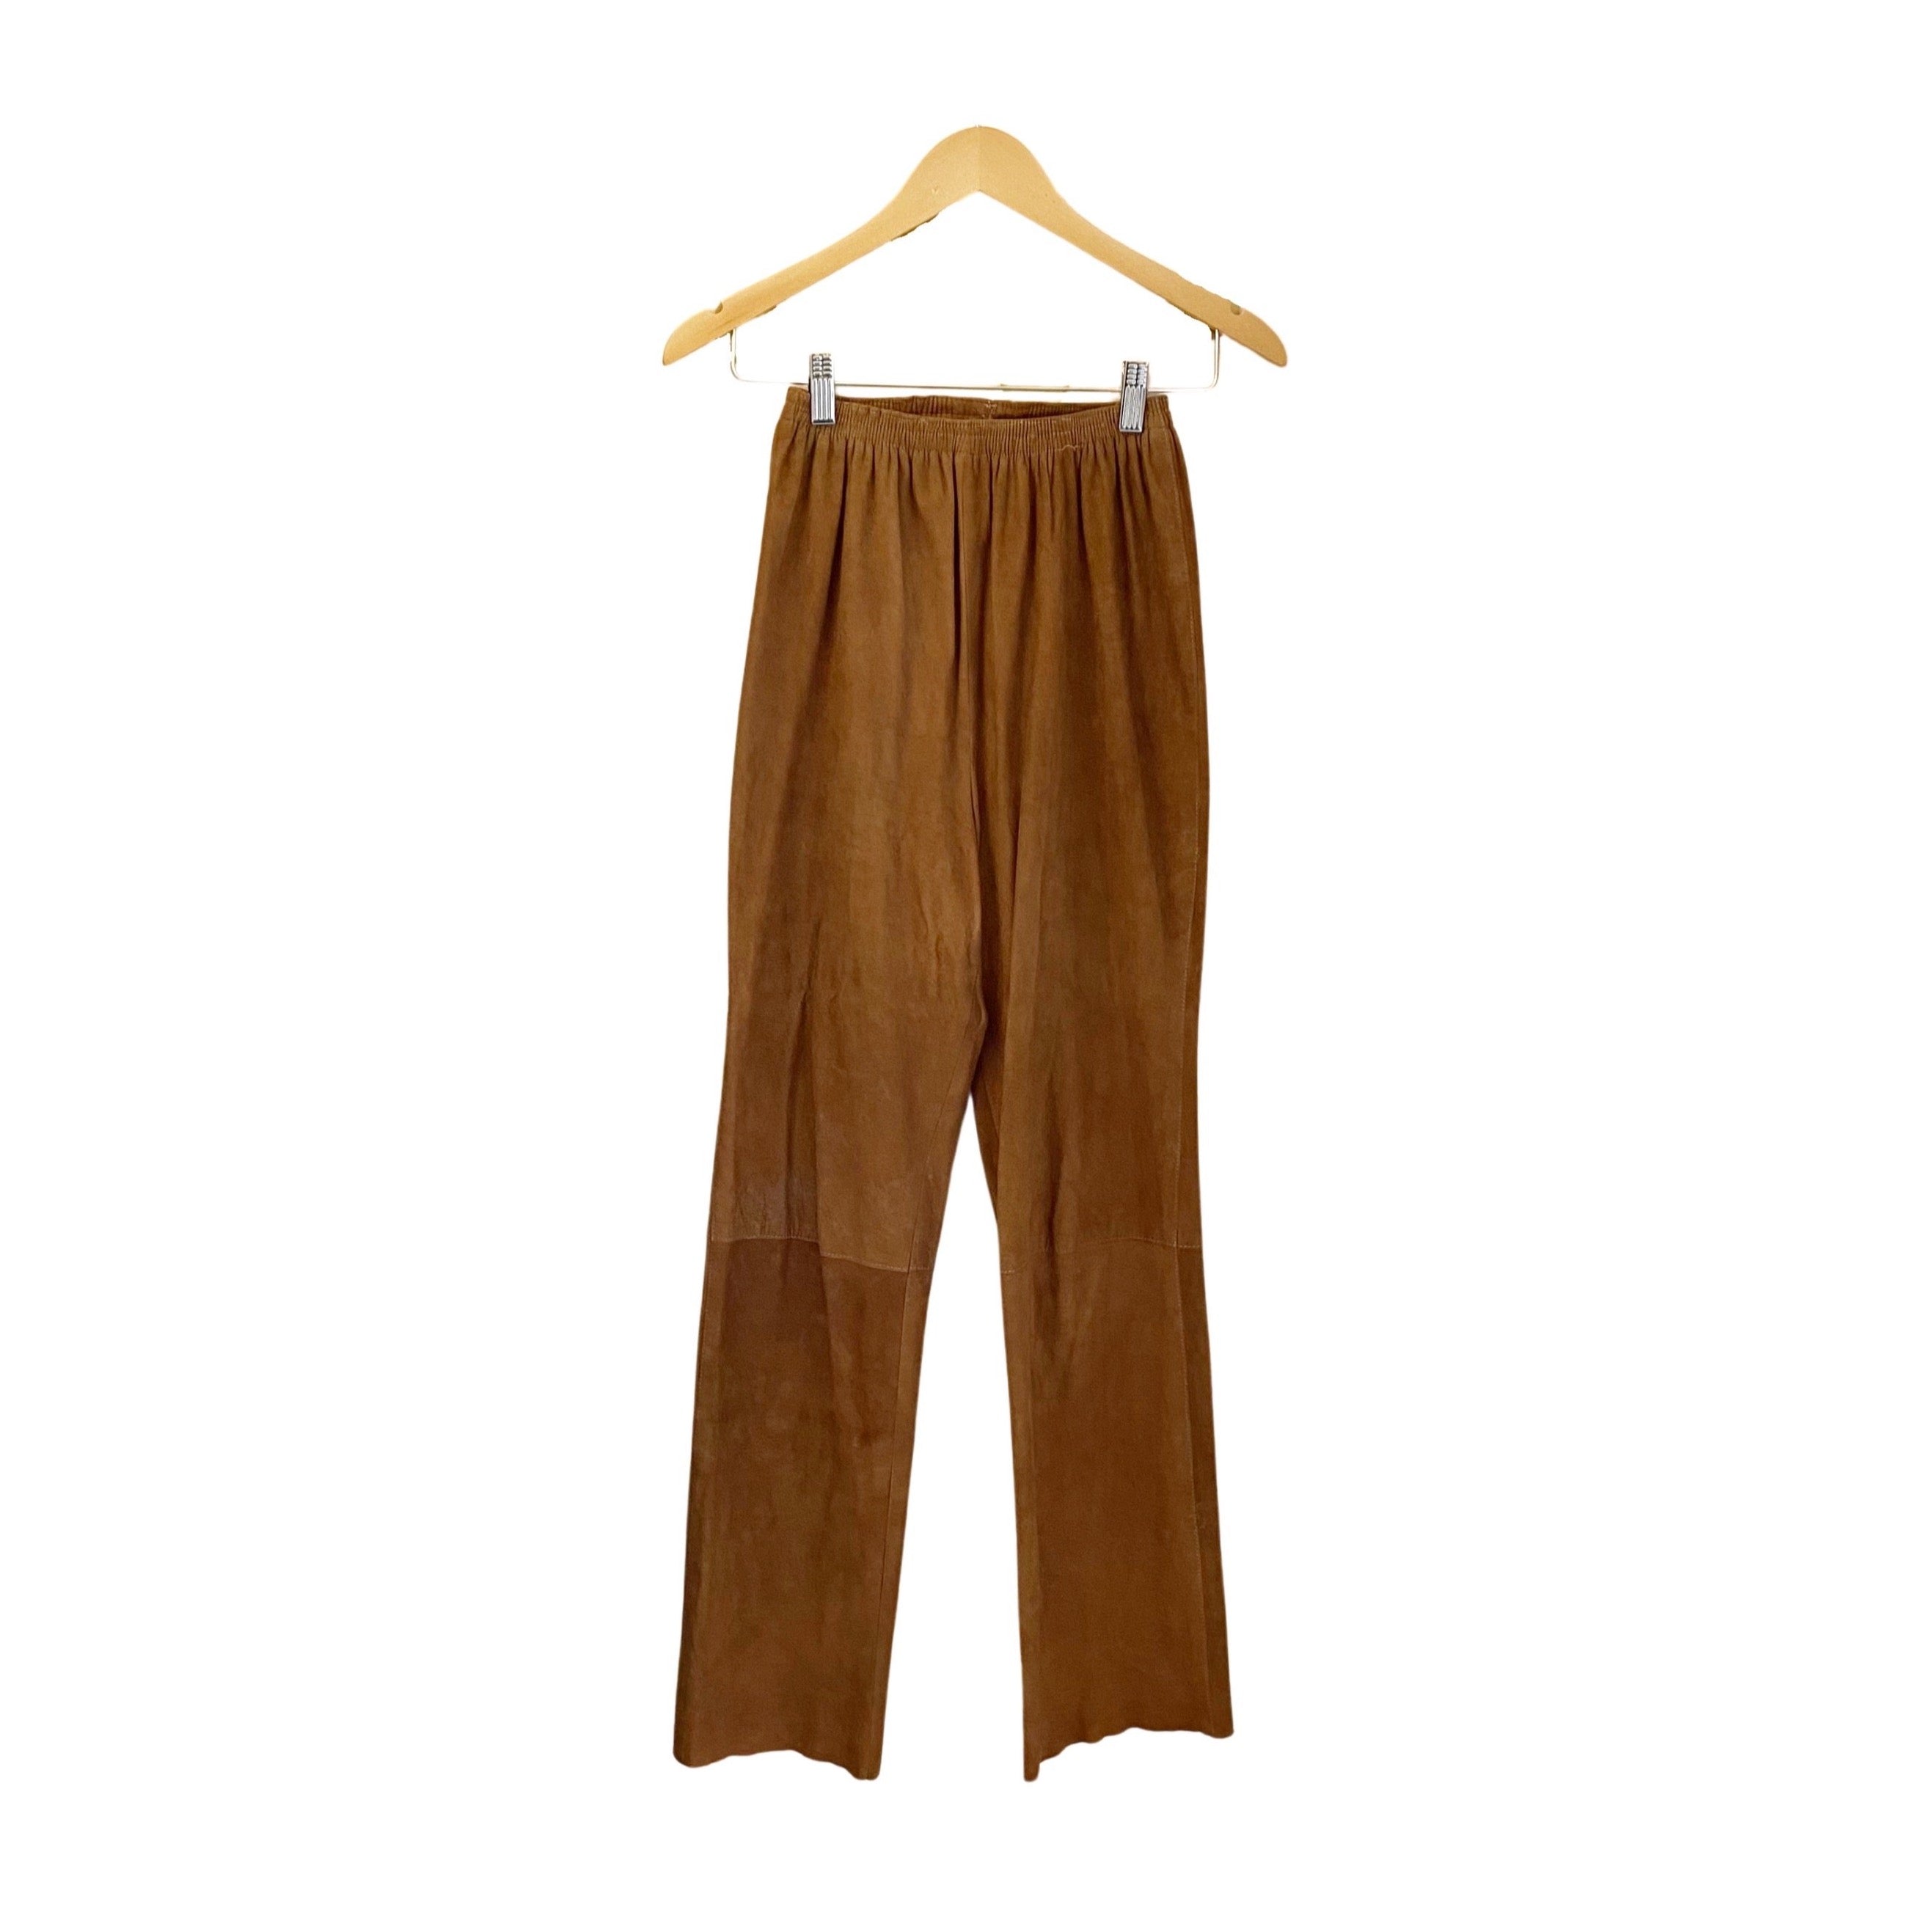 SUEDE IS ENOUGH HIGH WAISTED PANTS sz. P